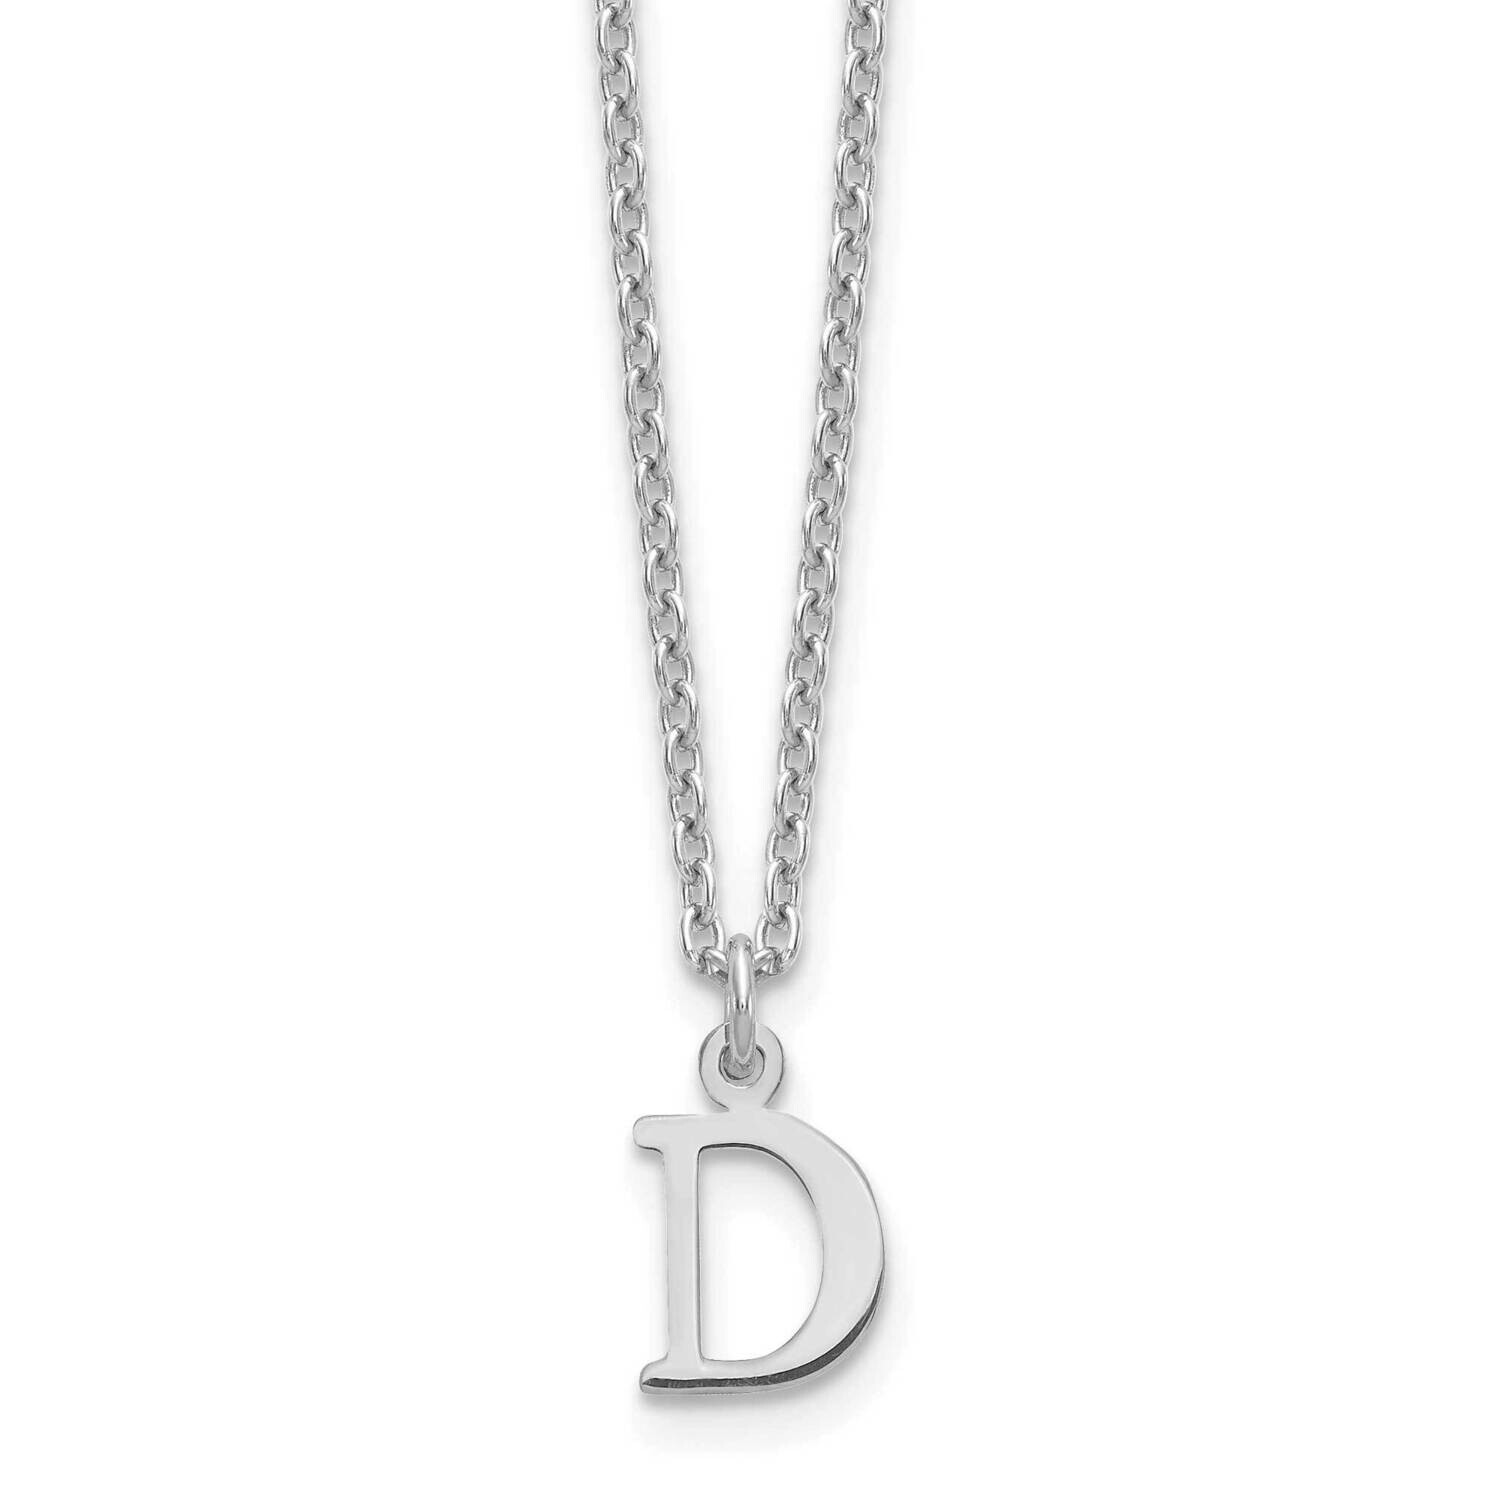 Cutout Letter D Initial Necklace Sterling Silver Rhodium-Plated XNA727SS/D